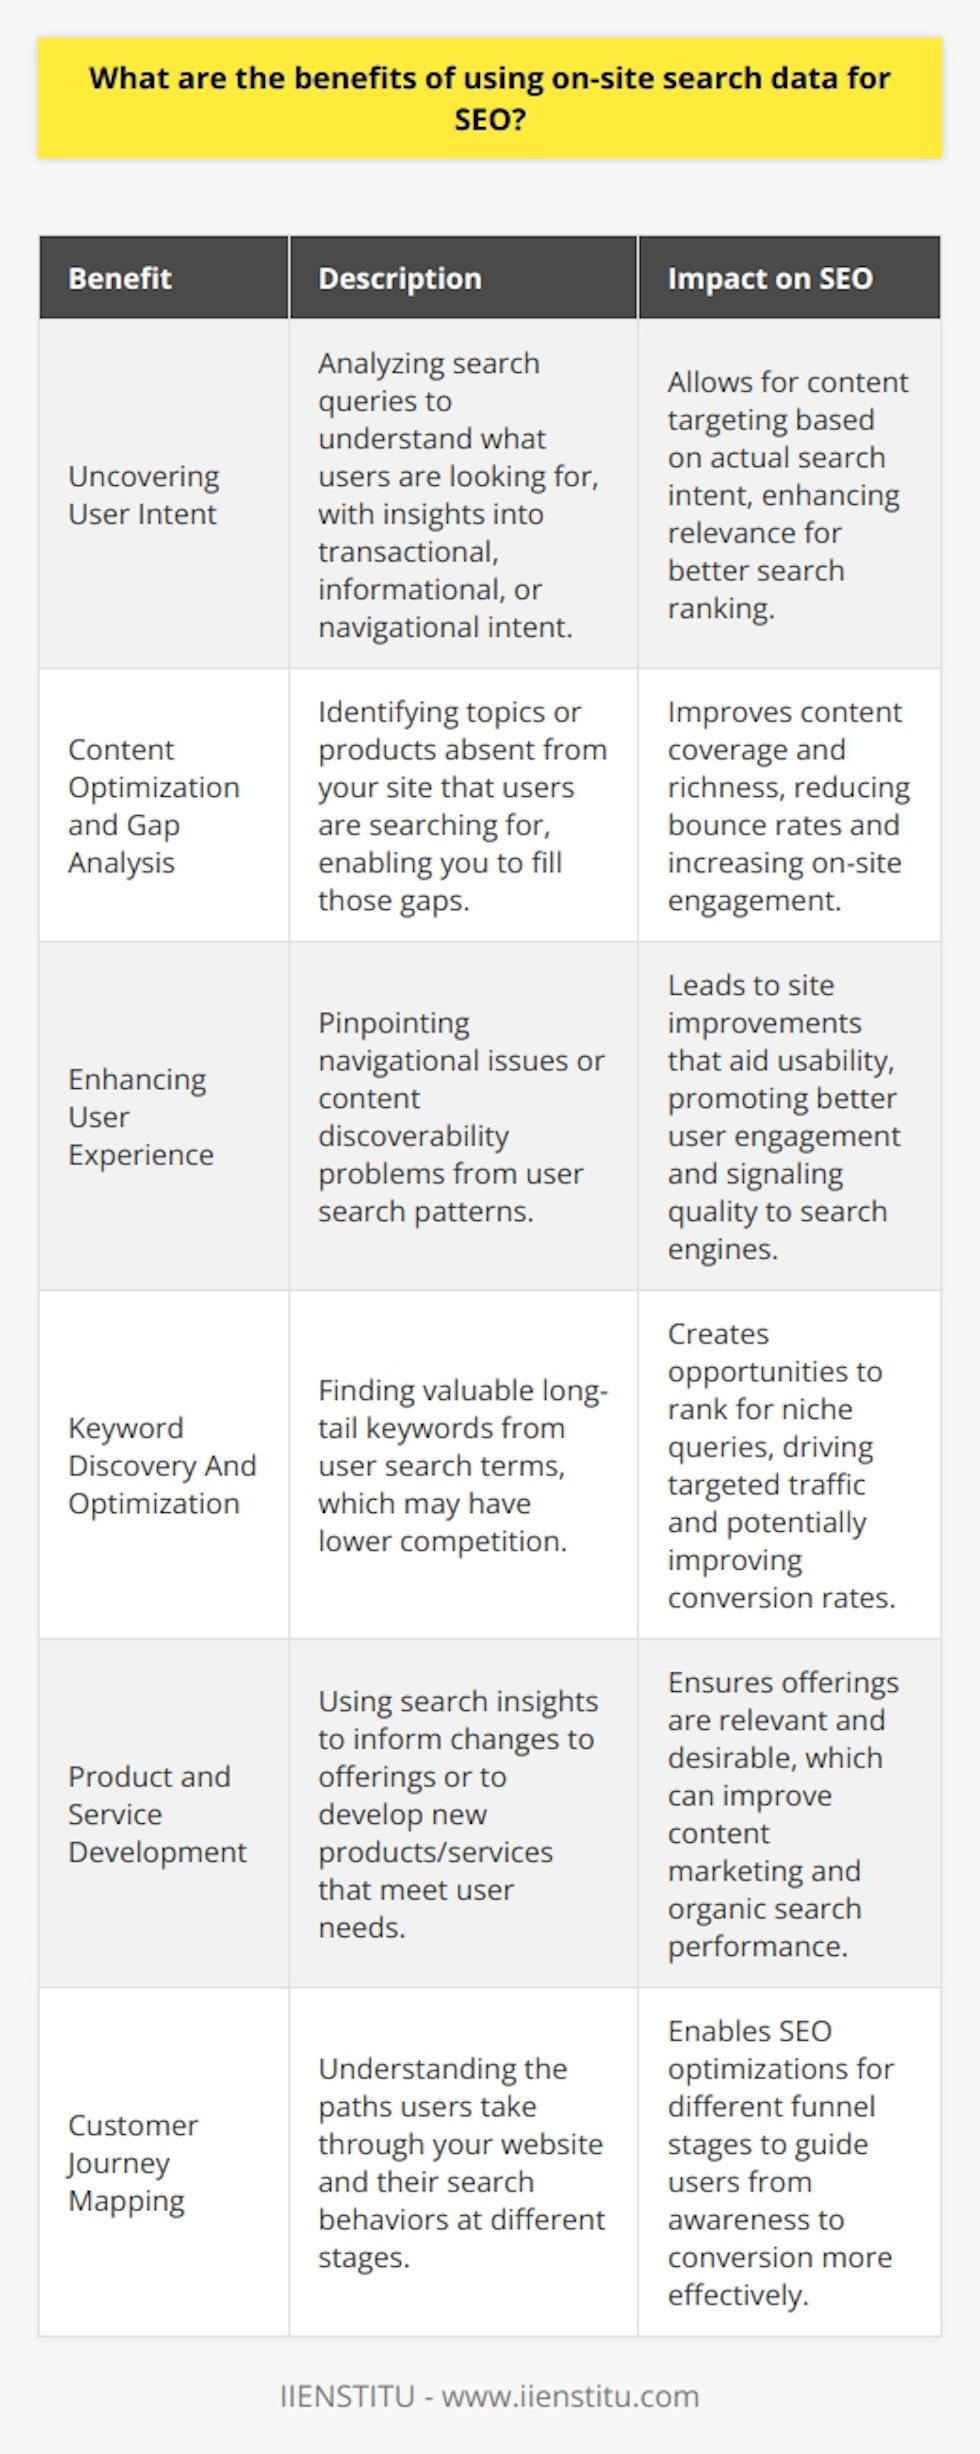 On-site search data, an often overlooked treasure trove of user insights, can be instrumental in honing your website's SEO strategy. By delving into the queries that visitors are entering into your website's search box, you can gain a nuanced understanding of what your audience is truly looking for, and adjust your content and optimization efforts accordingly. Here’s a closer look at the benefits that this data can offer to SEO:1. Uncovering User Intent:Understanding user intent is pivotal in SEO, and on-site search data can shed light on what your visitors seek. Are they looking for information, specific products, or troubleshooting guides? Analyzing the terms and phrases users input can reveal not just the topics that are of interest, but also the intent behind their searches – be it transactional, informational, or navigational.2. Content Optimization and Gap Analysis:By examining what users are searching for on your website, you can identify content gaps. Perhaps visitors are searching for a topic or product that you haven't fully covered. This insight allows you to create or refine content to satisfy user queries, keeping visitors on your site longer and reducing bounce rates.3. Enhancing User Experience:Analyzing on-site search data can pinpoint where users are struggling to find information on your website. This may point to issues with site navigation or content discoverability. Making it easier for users to find what they're looking for through improved site structure, better categorization, and clear navigation can enhance the user experience, positively influencing SEO.4. Keyword Discovery And Optimization:The words and phrases that users input in your site search can reveal valuable long-tail keywords that may not be immediately obvious through traditional keyword research tools. These keywords can be particularly beneficial for SEO as they tend to have less competition and can attract more targeted traffic.5. Product and Service Development:Insights from on-site search data are not confined to SEO; they can also inform product or service development. By understanding what users are actively seeking, you can adjust your offerings to better align with customer needs, potentially opening new business avenues or optimizing existing ones for better performance.6. Customer Journey Mapping:On-site search data aids in mapping the customer journey through your website. This knowledge enables you to align your SEO efforts with the typical paths users take, ensuring that the right content is available and optimized at each stage of the funnel, from awareness to decision-making.To conclude, leveraging on-site search data can significantly contribute to refining SEO strategies by aligning content with actual user needs, enhancing site usability, uncovering new keyword opportunities, and ultimately ensuring that a website and its offerings are fine-tuned to the audience it seeks to attract. By putting users at the heart of SEO efforts, site owners can expect to see an uptick in both website performance and user satisfaction, a goal that institutions like IIENSTITU understand well as they extend their educational resources to meet user demand through insightful data analysis and application.